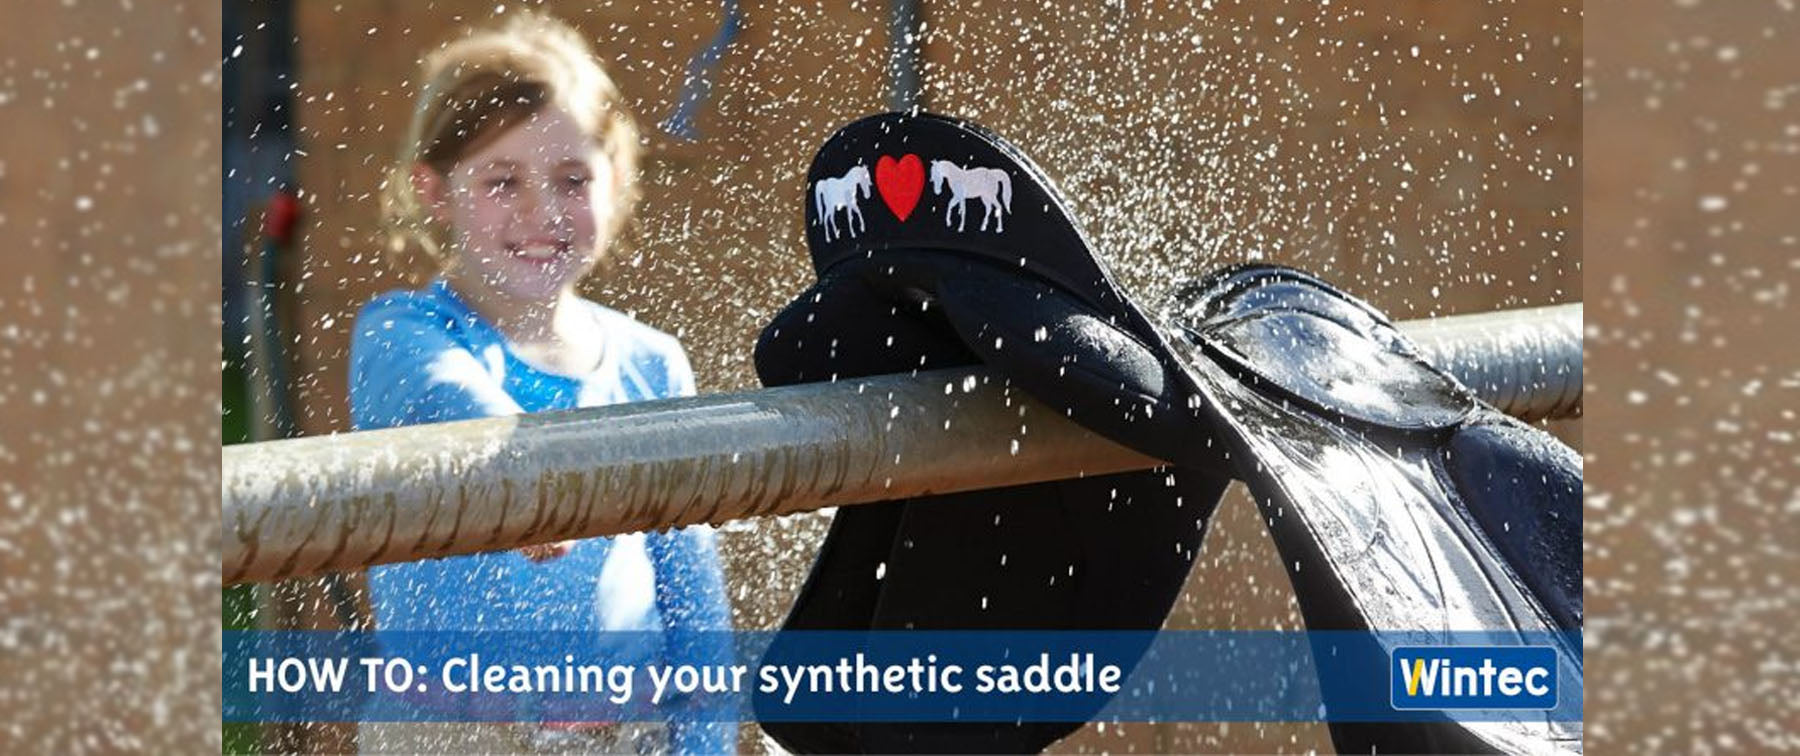 How to Clean your Synthetic Saddle